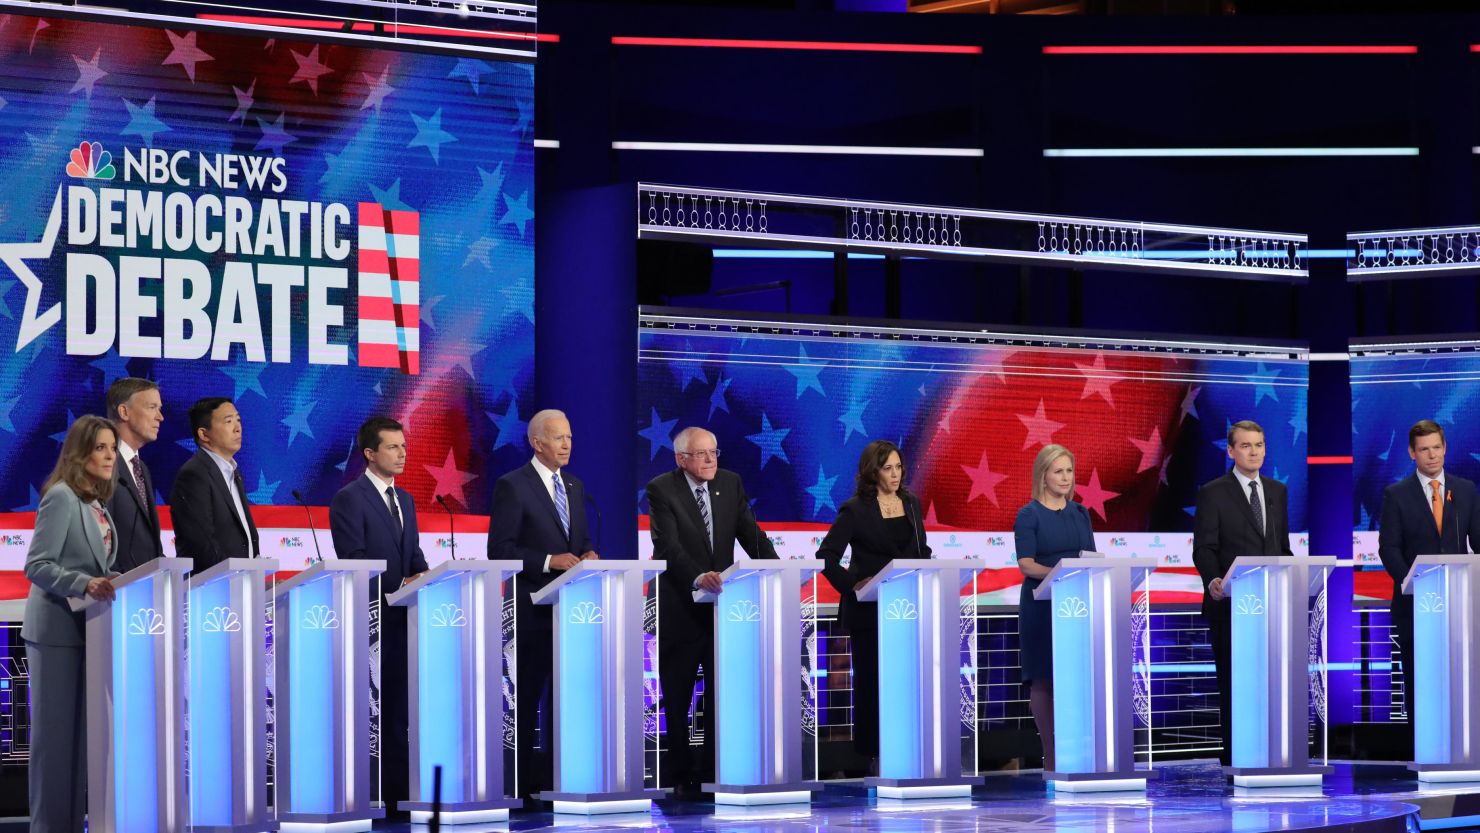 MIAMI, FLORIDA - JUNE 27: Democratic presidential candidates take part in the second night of the first Democratic presidential debate on June 27, 2019 in Miami, Florida. (Photo by Drew Angerer/Getty Images)